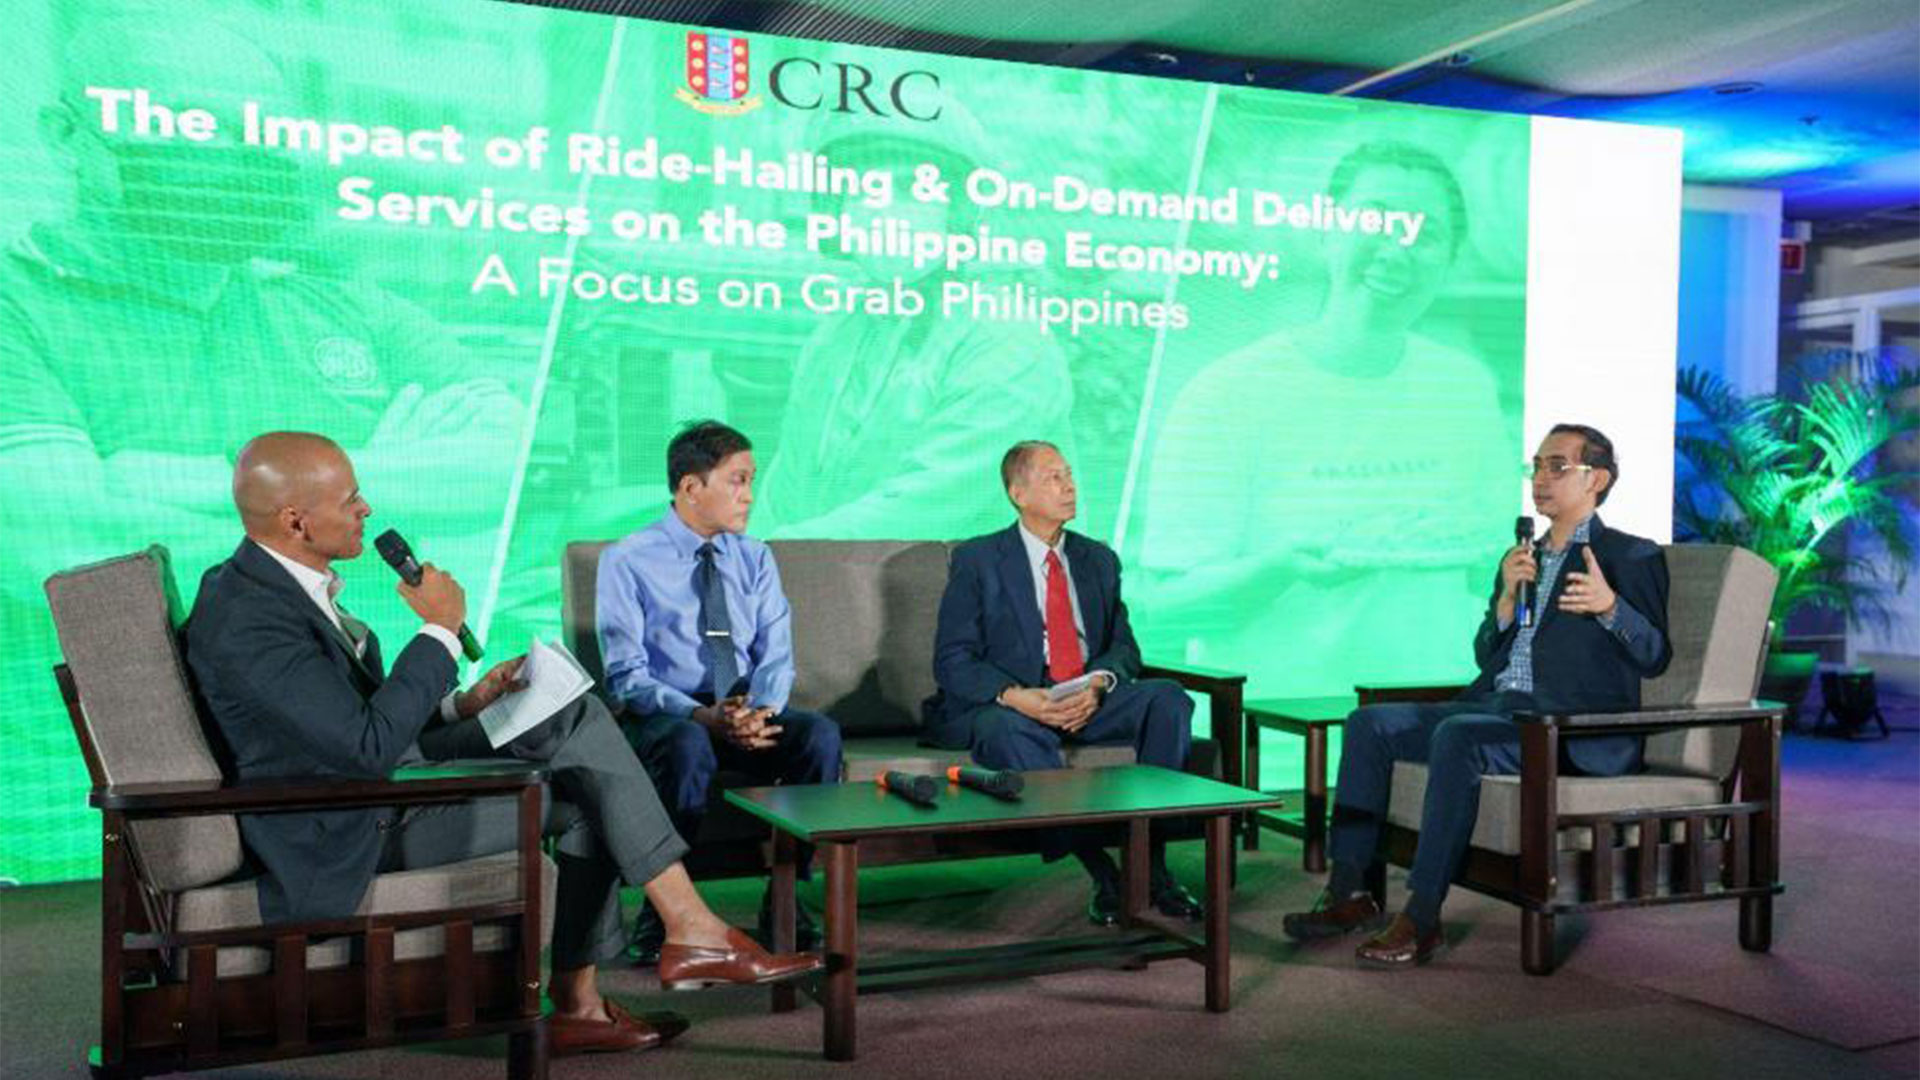 For every peso spent on Grab, P3.42 is injected into the economy — CRC study